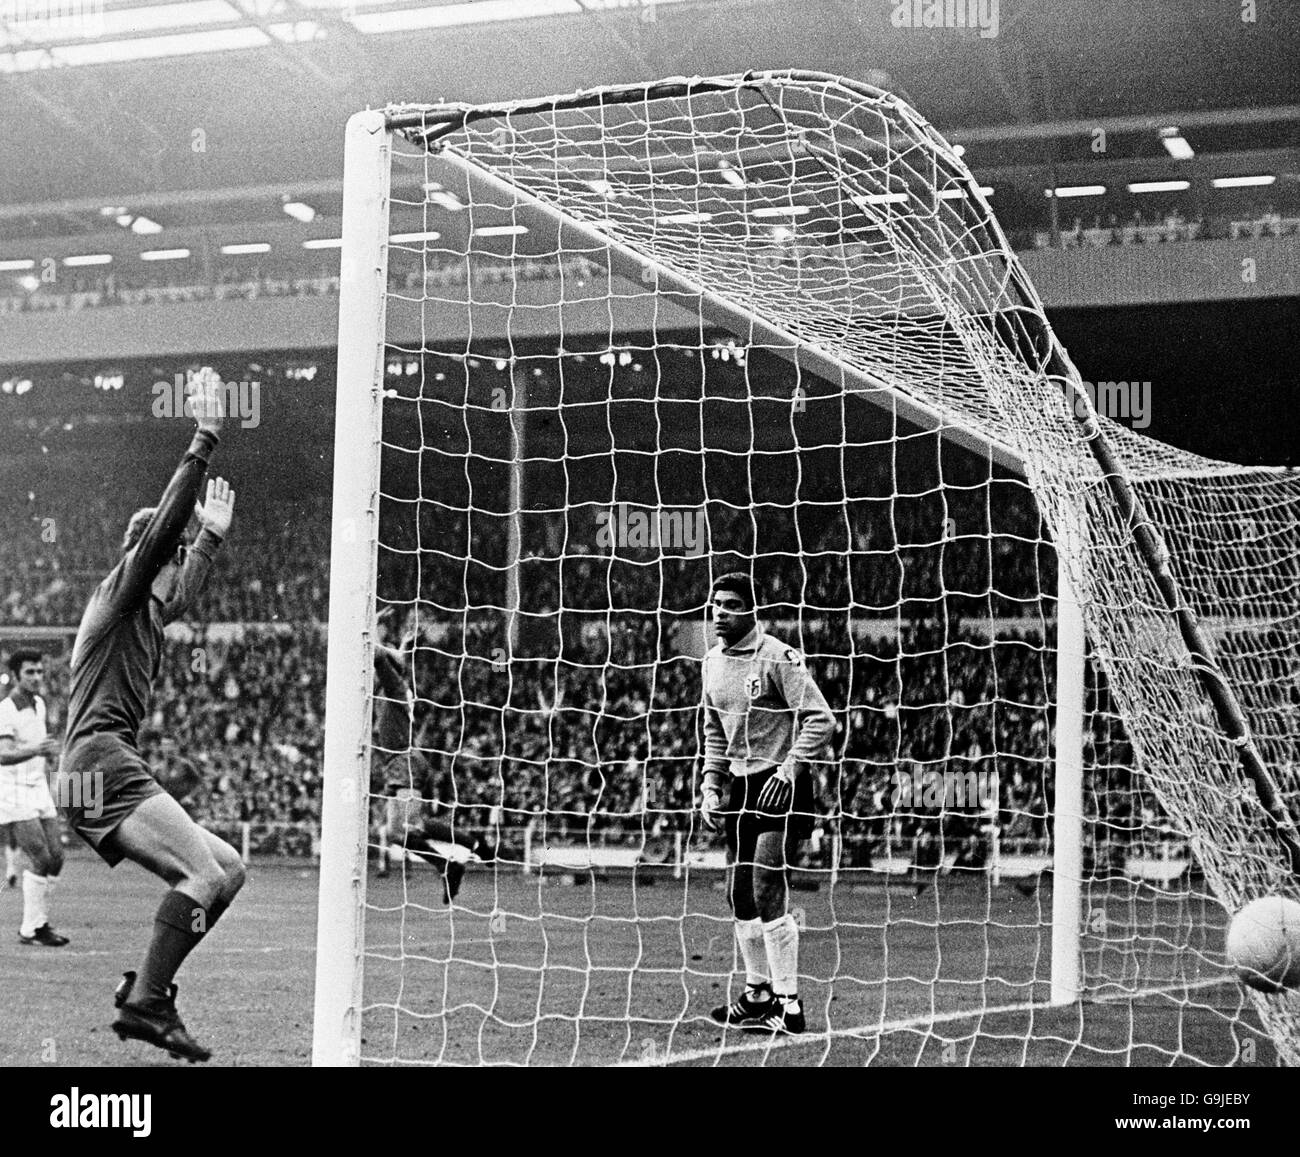 Soccer - European Cup - Final - Manchester United v Benfica Stock Photo